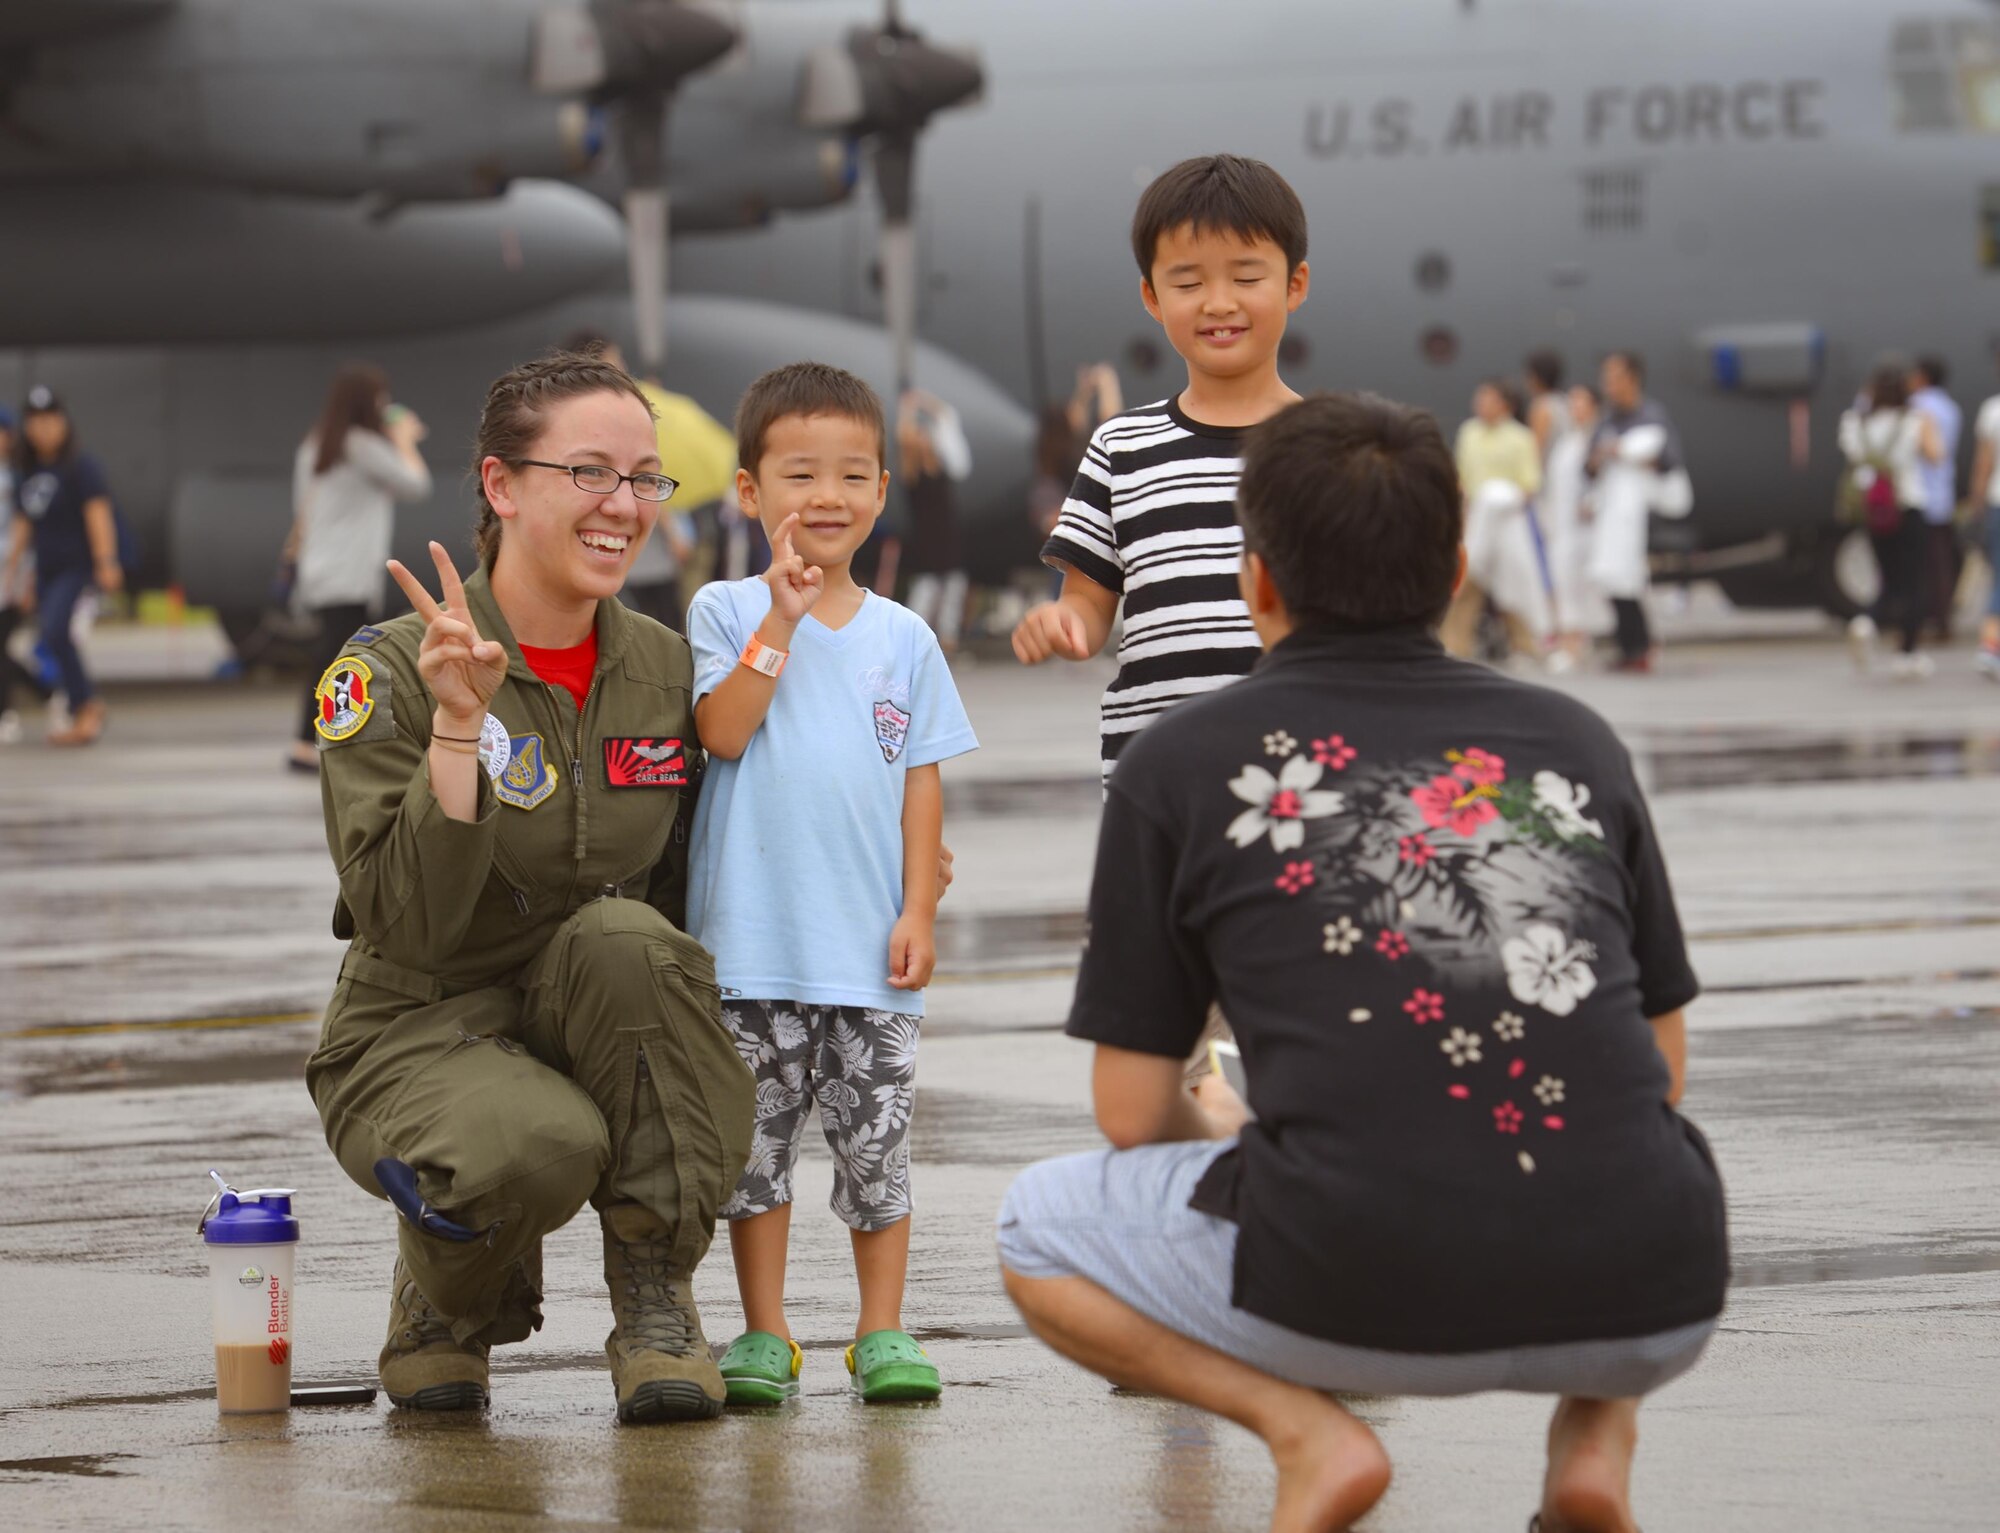 Festivalgoers pose with Captain Sydney Croxton, 36th Airlift Squadron C-130H Hercules pilot, during the 2016 Japanese-American Friendship Festival at Yokota Air Base, Japan, Sept. 17, 2016. The festival is held annually and offers the US military on base a chance to share their work and culture with their off-base neighbors. More than 185,000 people attended in 2015. (U.S. Air Force photo by Airman 1st Class Elizabeth Baker/Released)